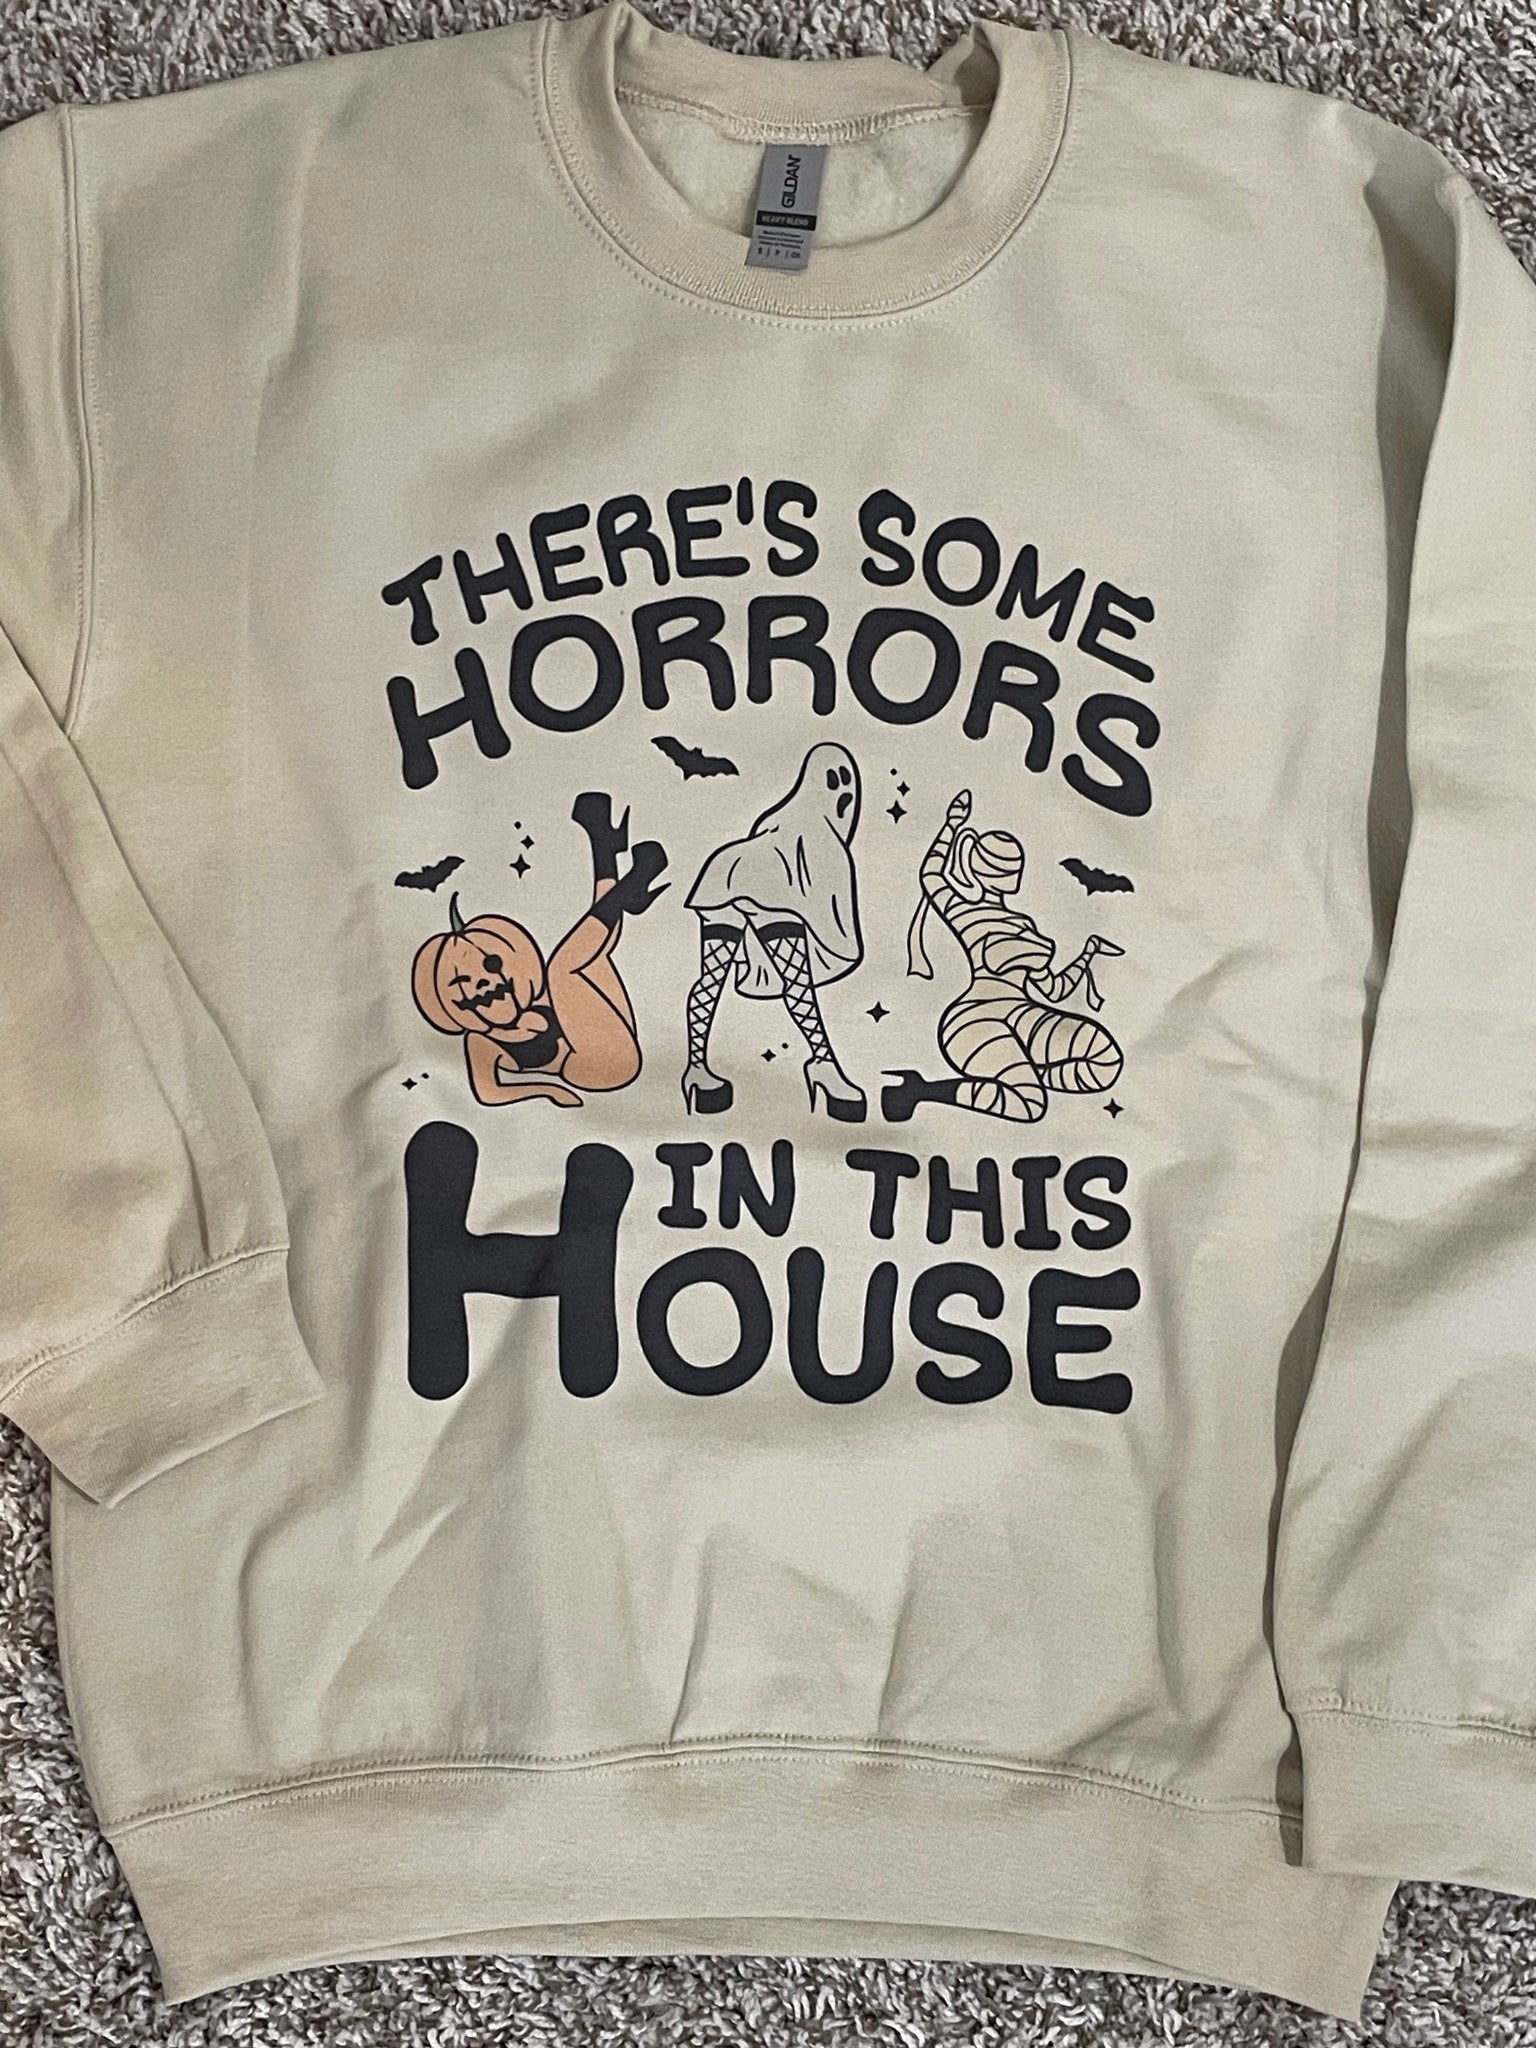 Horrors In This House | S - 2XL 35.00 | SRB